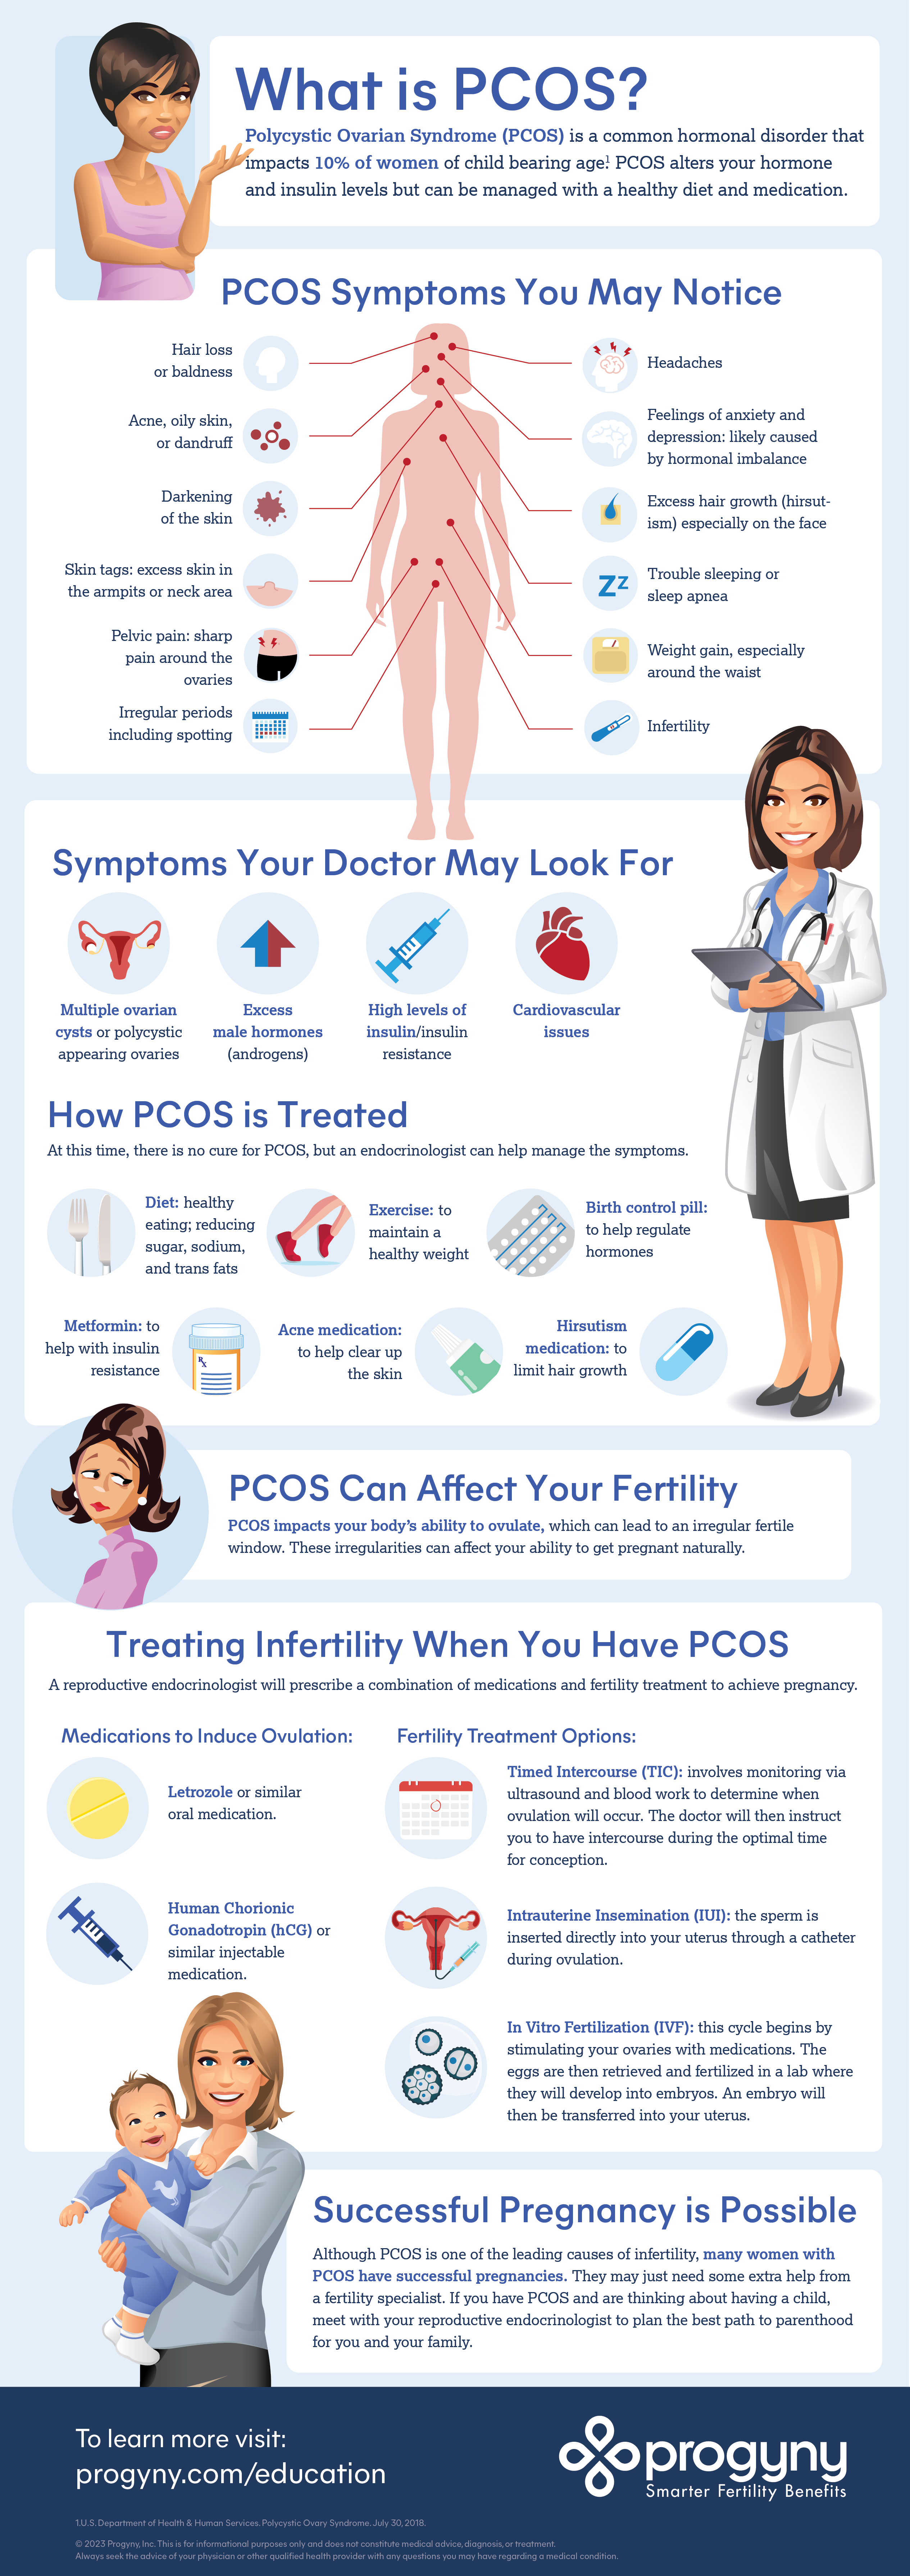 infographic illustrating PCOS (polycystic ovary syndrome), its symptoms, how its treated, how it can affect your fertility, treating infertility when you have PCOS